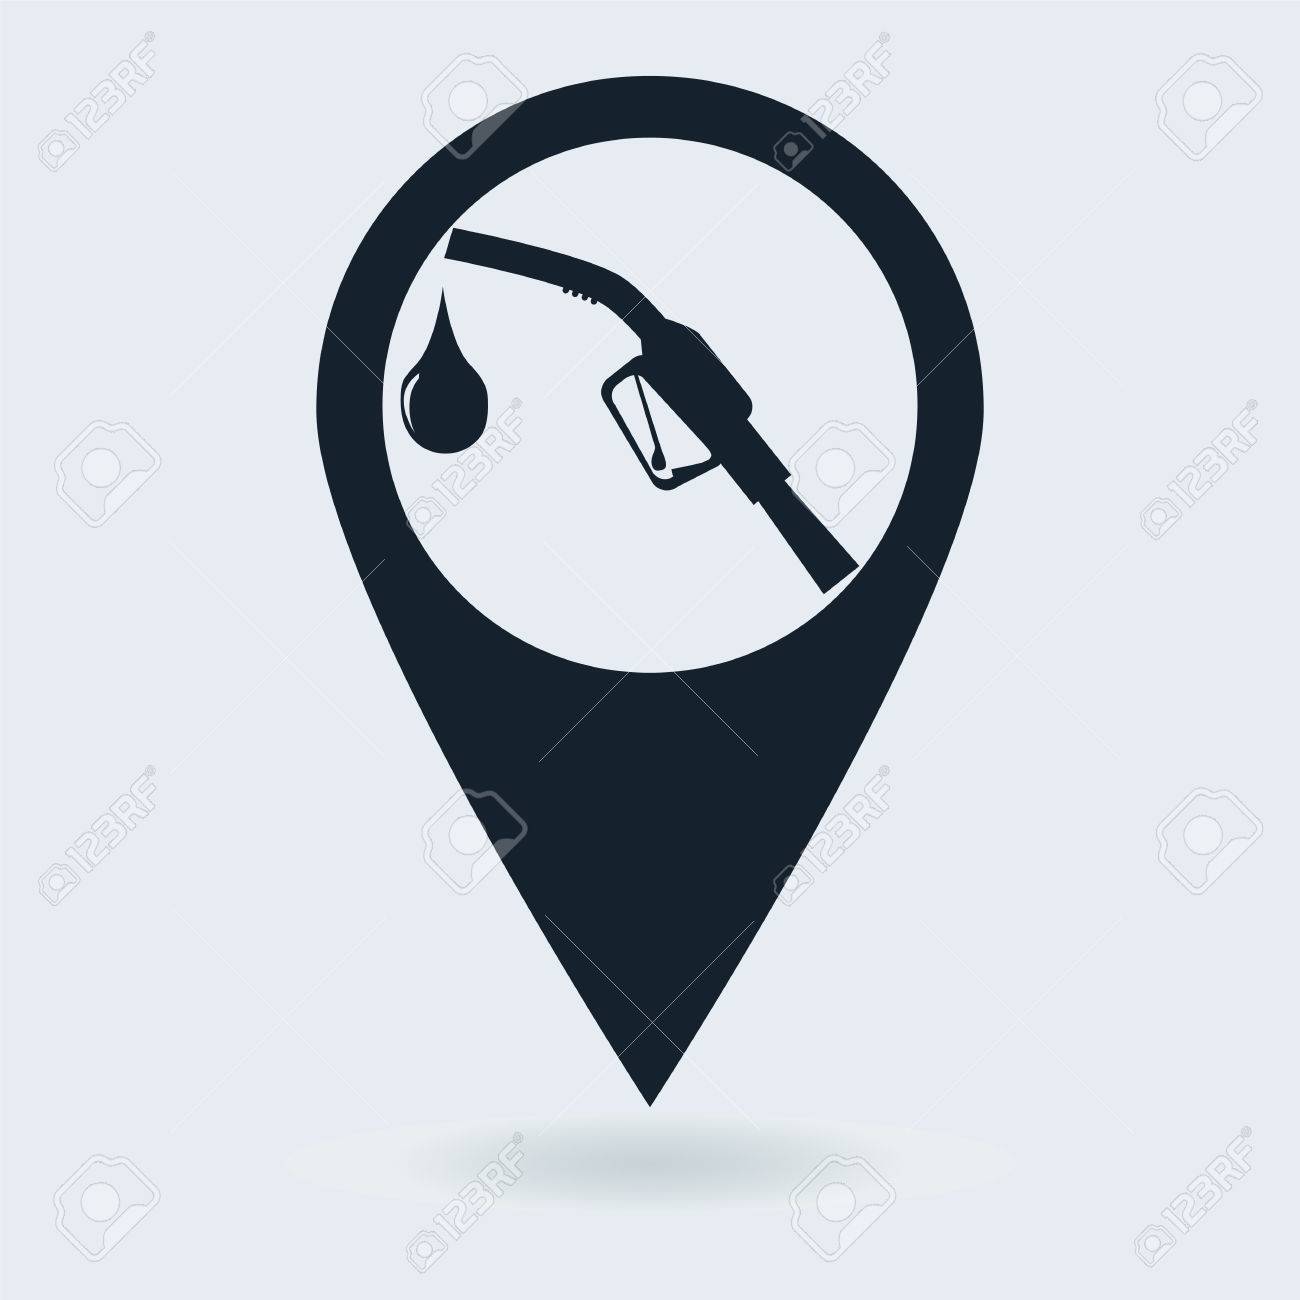 Black Icon With Gun For Fuel Pump - Gas Station Sign Royalty Free 